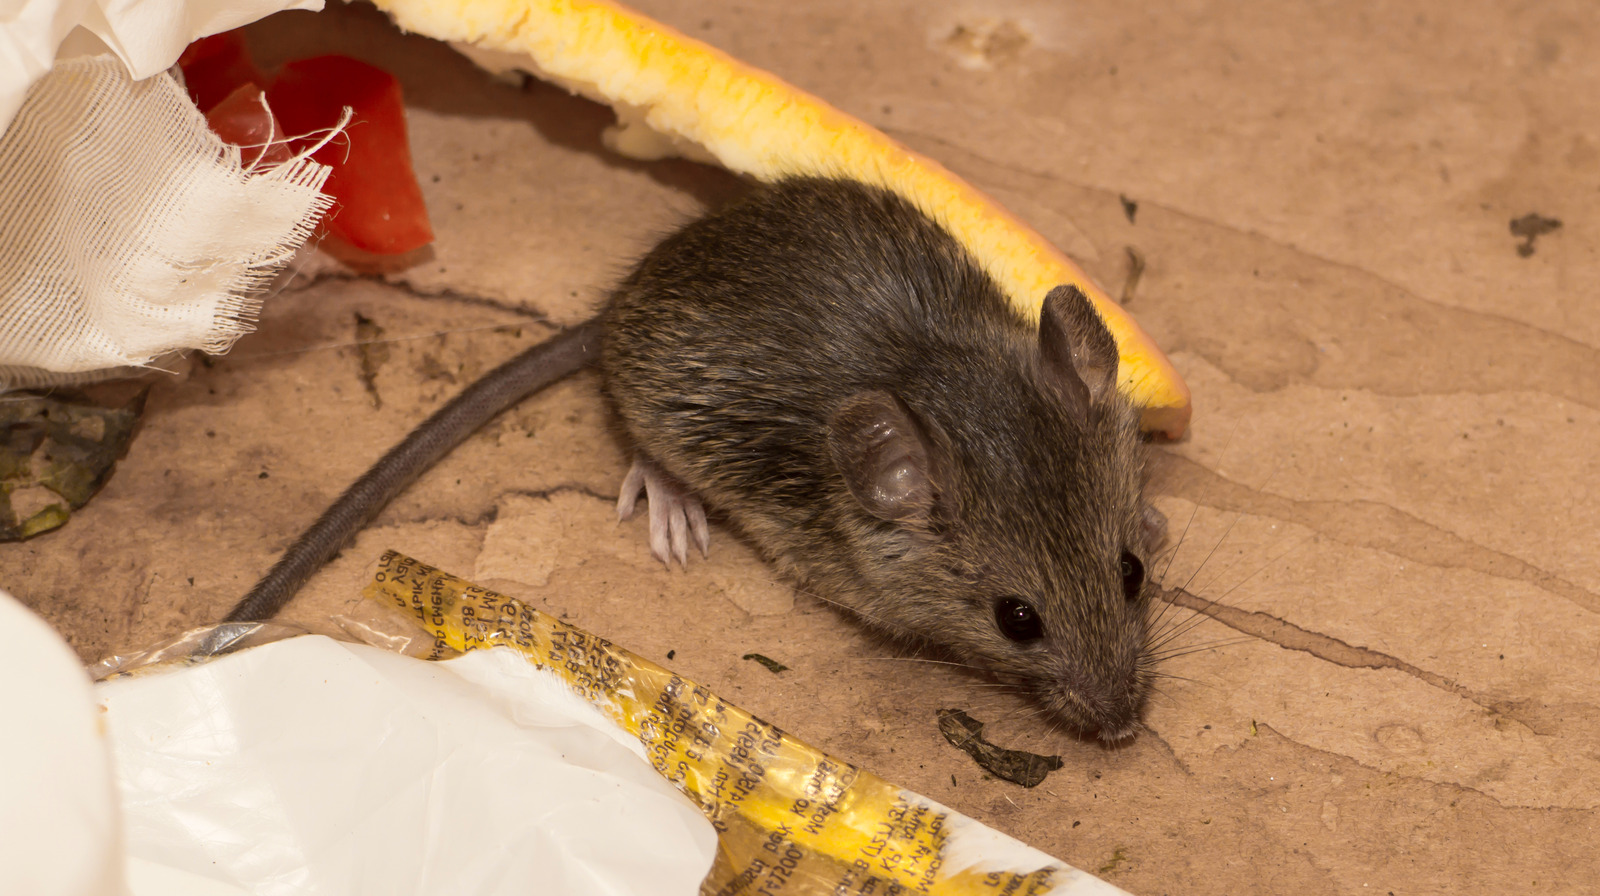 https://www.housedigest.com/img/gallery/the-pantry-item-thatll-help-keep-mice-out-of-your-home/l-intro-1699284597.jpg